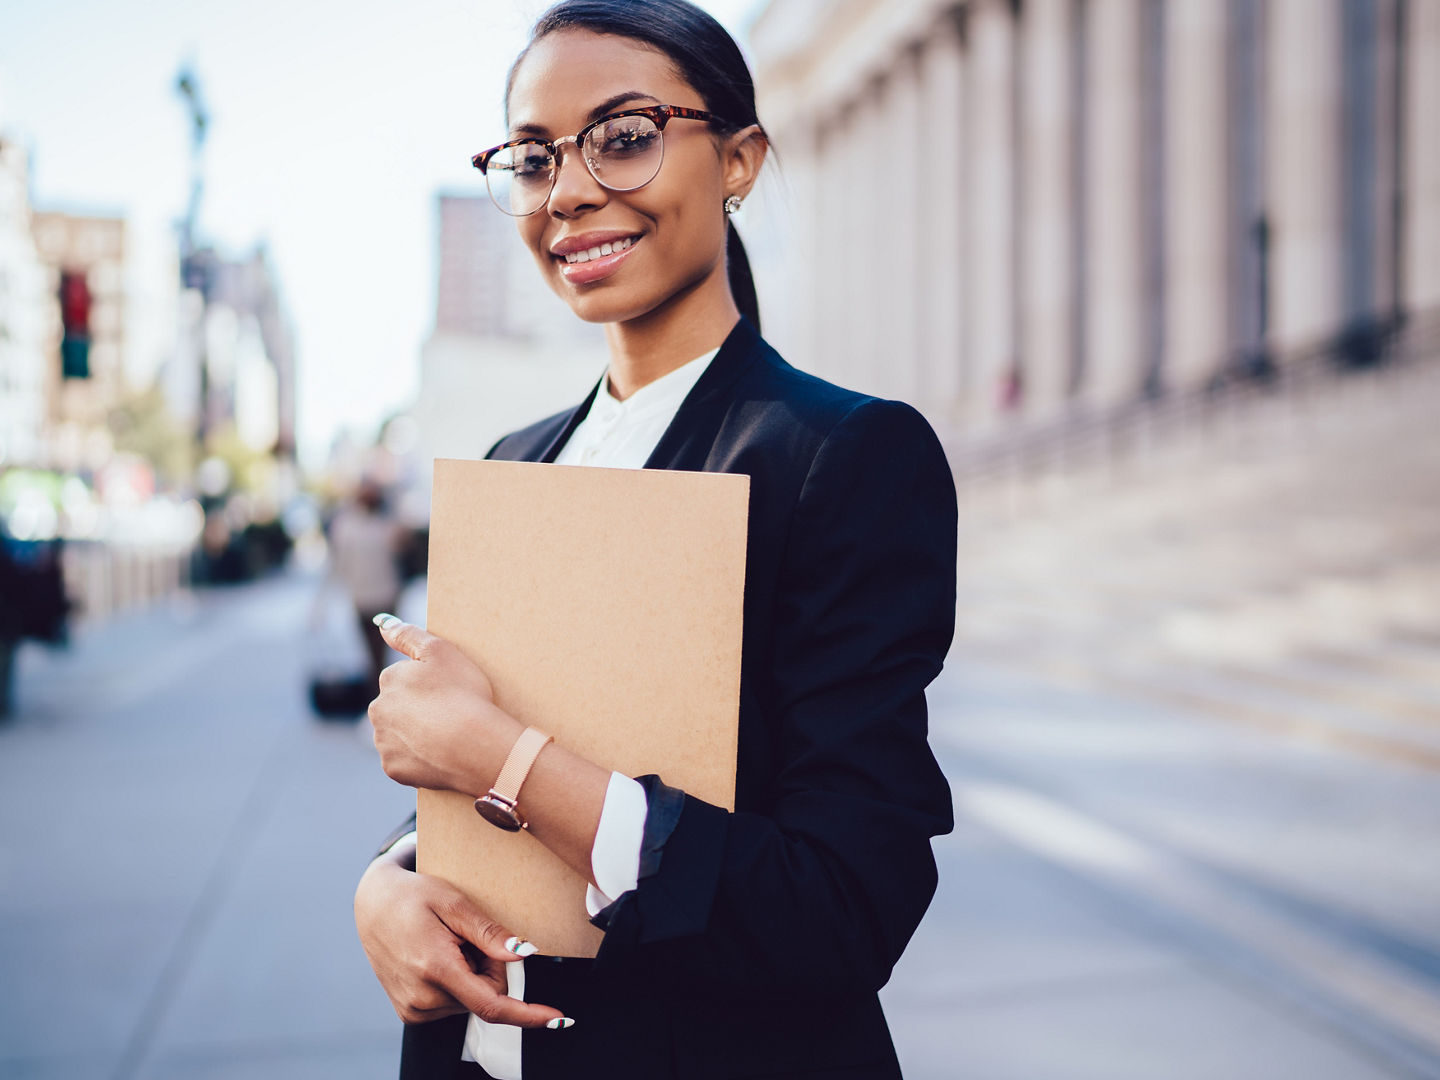 Portrait of successful african american student of faculty of law with folder in hands smiling at camera.Cheerful female office worker with dark skin dressed in formal wear standing outdoors